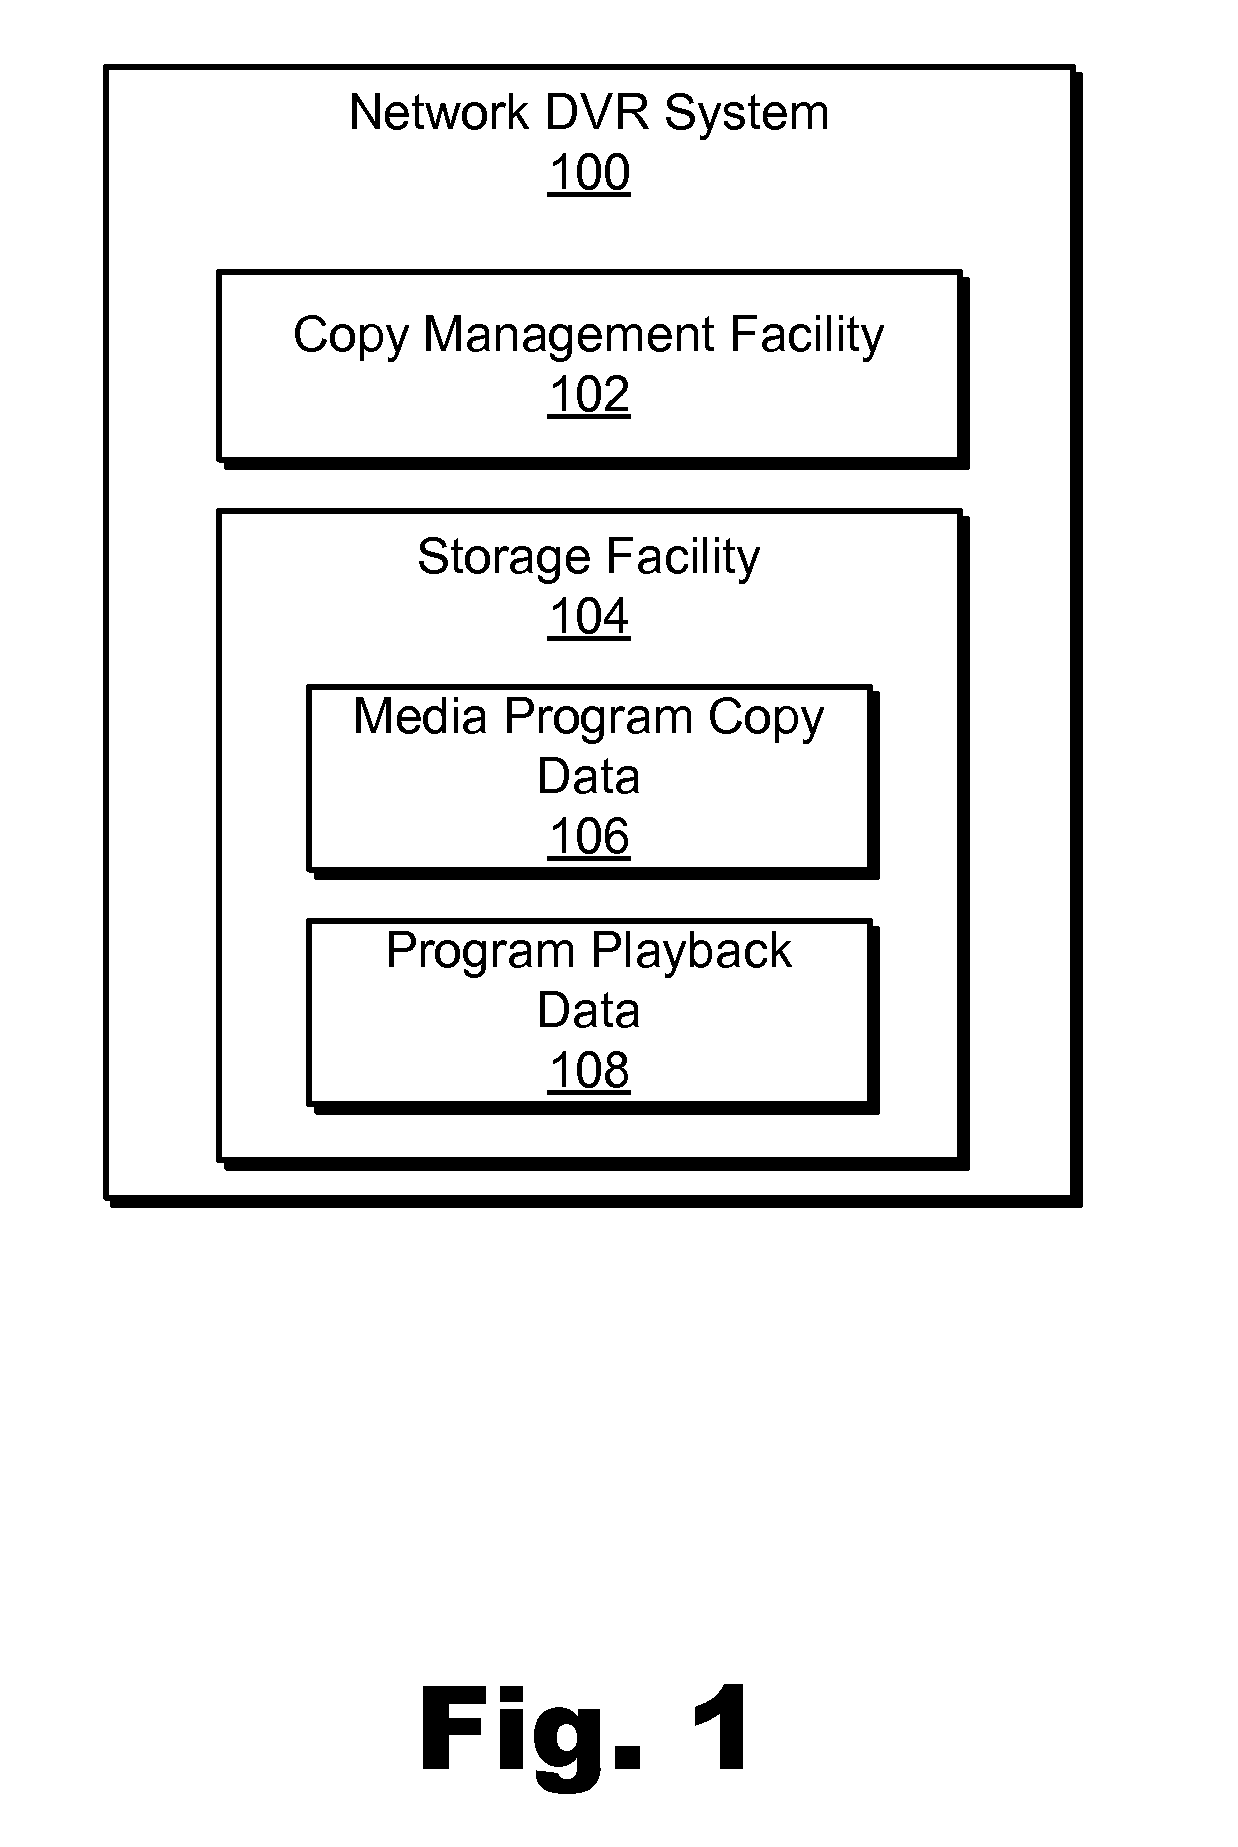 Methods and Systems for Managing Storage of Media Program Copies Within a Network Digital Video Recording System